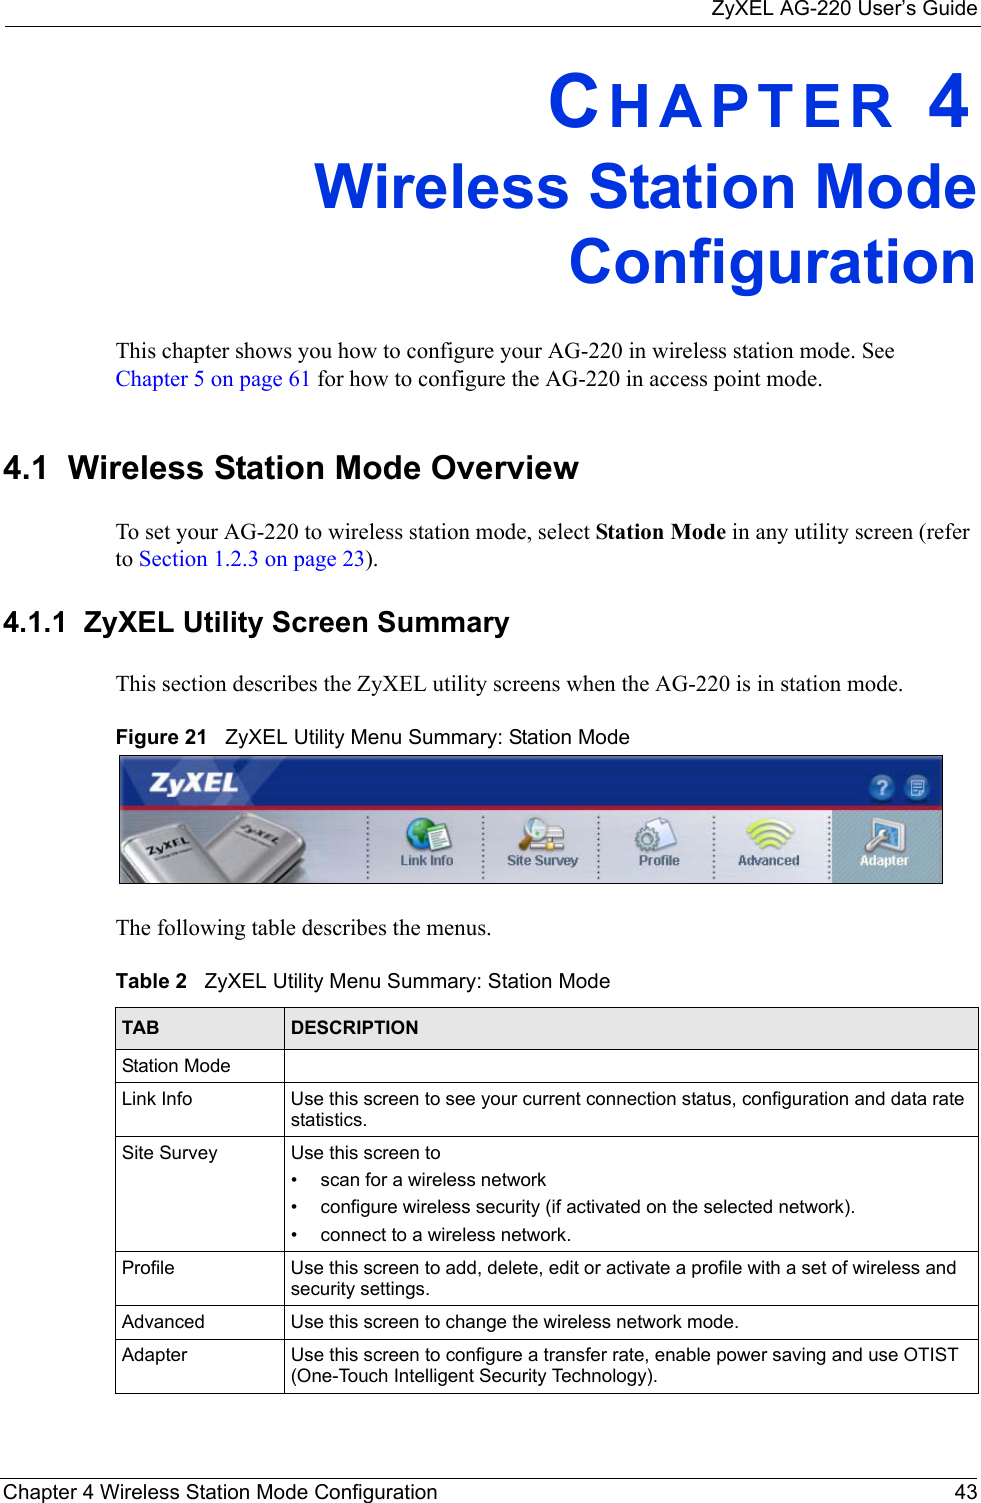 ZyXEL AG-220 User’s GuideChapter 4 Wireless Station Mode Configuration 43CHAPTER 4Wireless Station ModeConfigurationThis chapter shows you how to configure your AG-220 in wireless station mode. See Chapter 5 on page 61 for how to configure the AG-220 in access point mode.4.1  Wireless Station Mode Overview To set your AG-220 to wireless station mode, select Station Mode in any utility screen (refer to Section 1.2.3 on page 23). 4.1.1  ZyXEL Utility Screen Summary This section describes the ZyXEL utility screens when the AG-220 is in station mode. Figure 21   ZyXEL Utility Menu Summary: Station Mode The following table describes the menus. Table 2   ZyXEL Utility Menu Summary: Station ModeTAB DESCRIPTIONStation ModeLink Info Use this screen to see your current connection status, configuration and data rate statistics.Site Survey Use this screen to • scan for a wireless network• configure wireless security (if activated on the selected network).• connect to a wireless network.Profile Use this screen to add, delete, edit or activate a profile with a set of wireless and security settings.Advanced Use this screen to change the wireless network mode.Adapter Use this screen to configure a transfer rate, enable power saving and use OTIST (One-Touch Intelligent Security Technology).